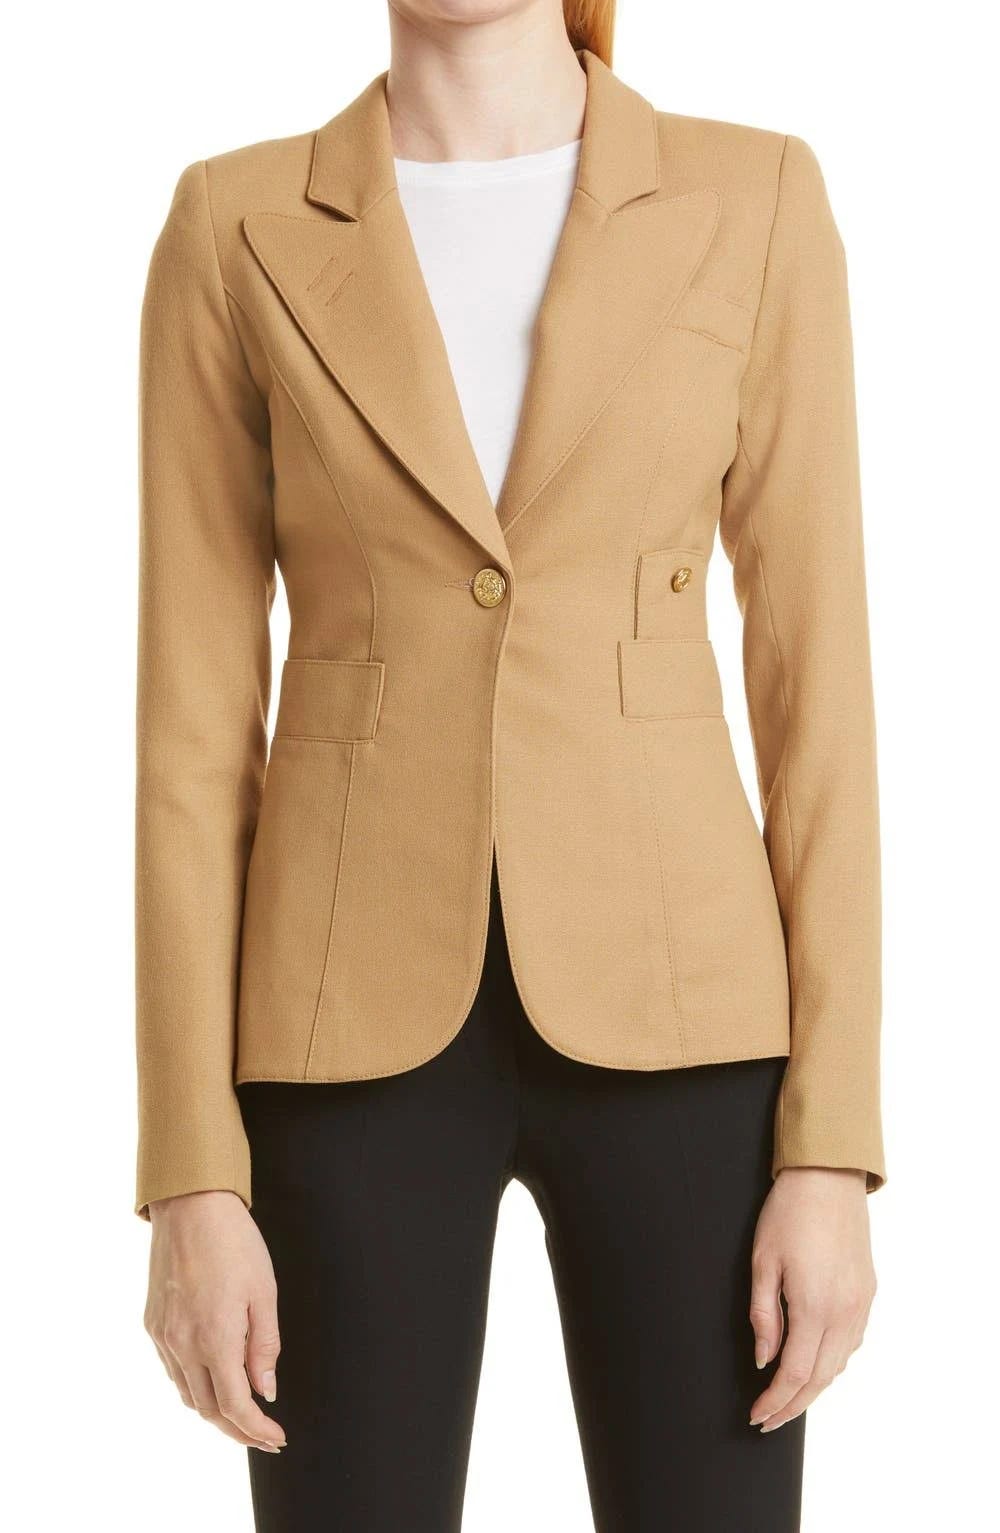 Smythe Classic Duchess Camel Blazer with Exquisite Wool Material and Lined Details | Image